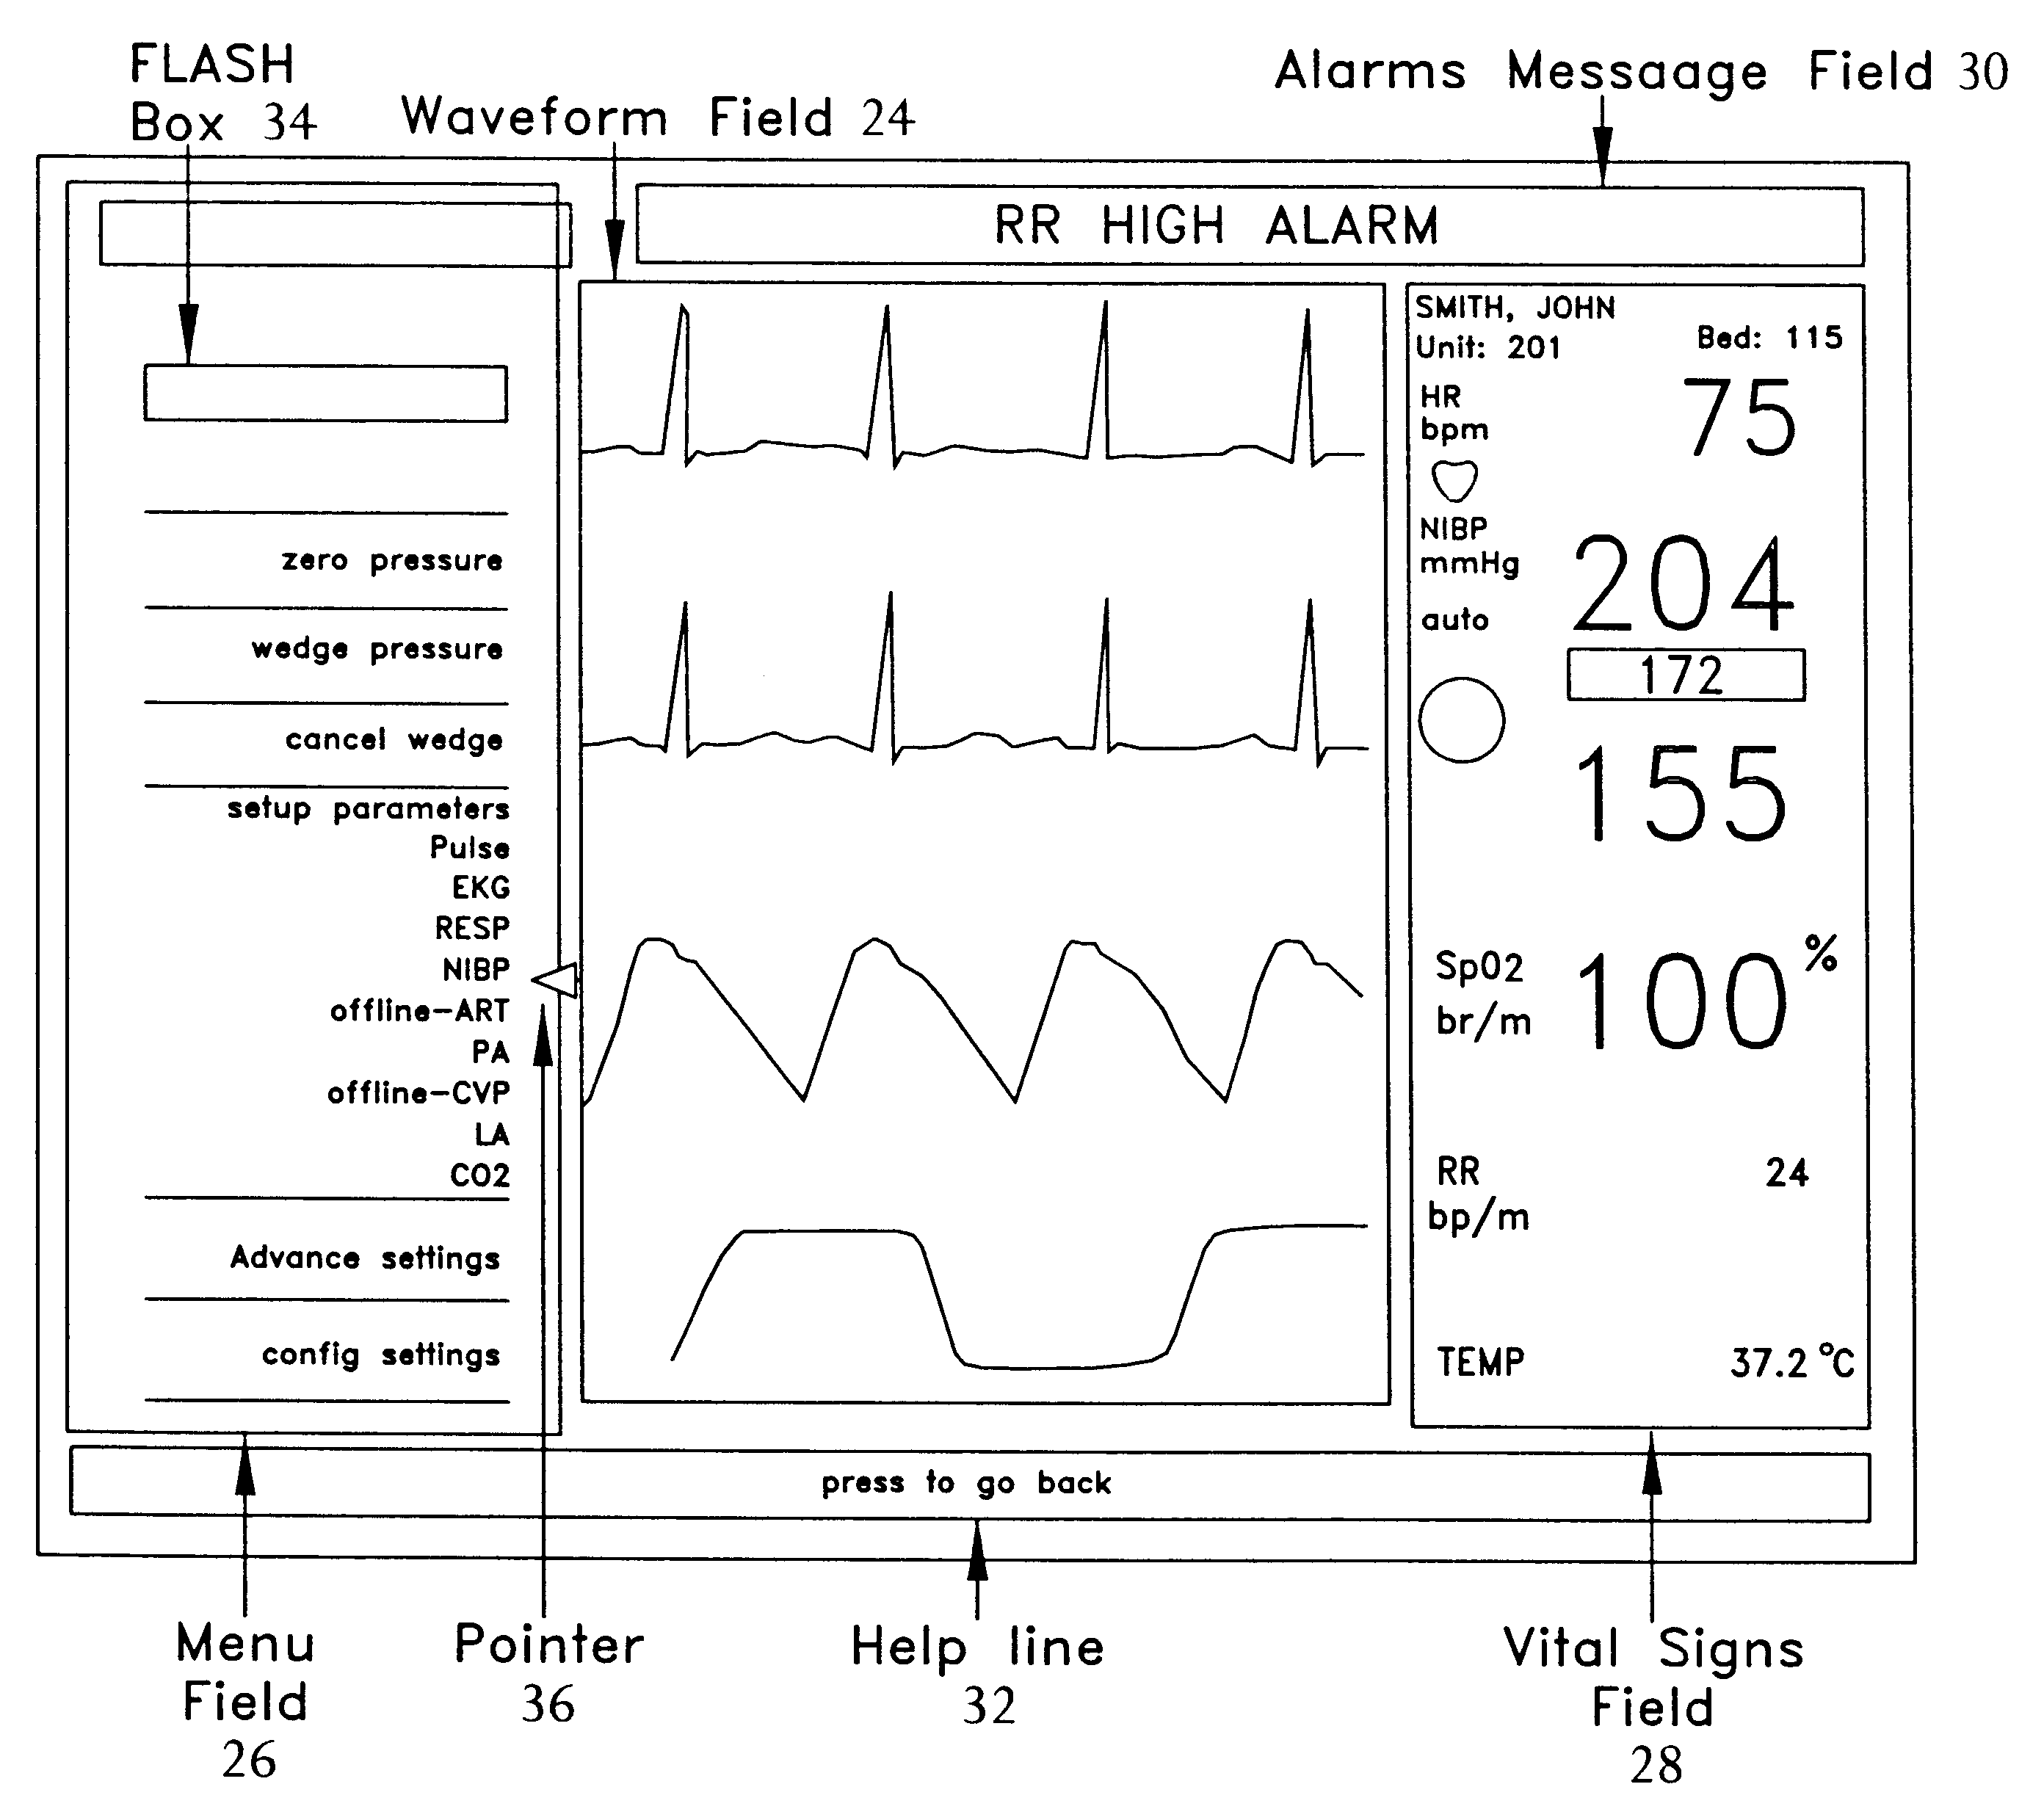 Reconfigurable user interface for modular patient monitor